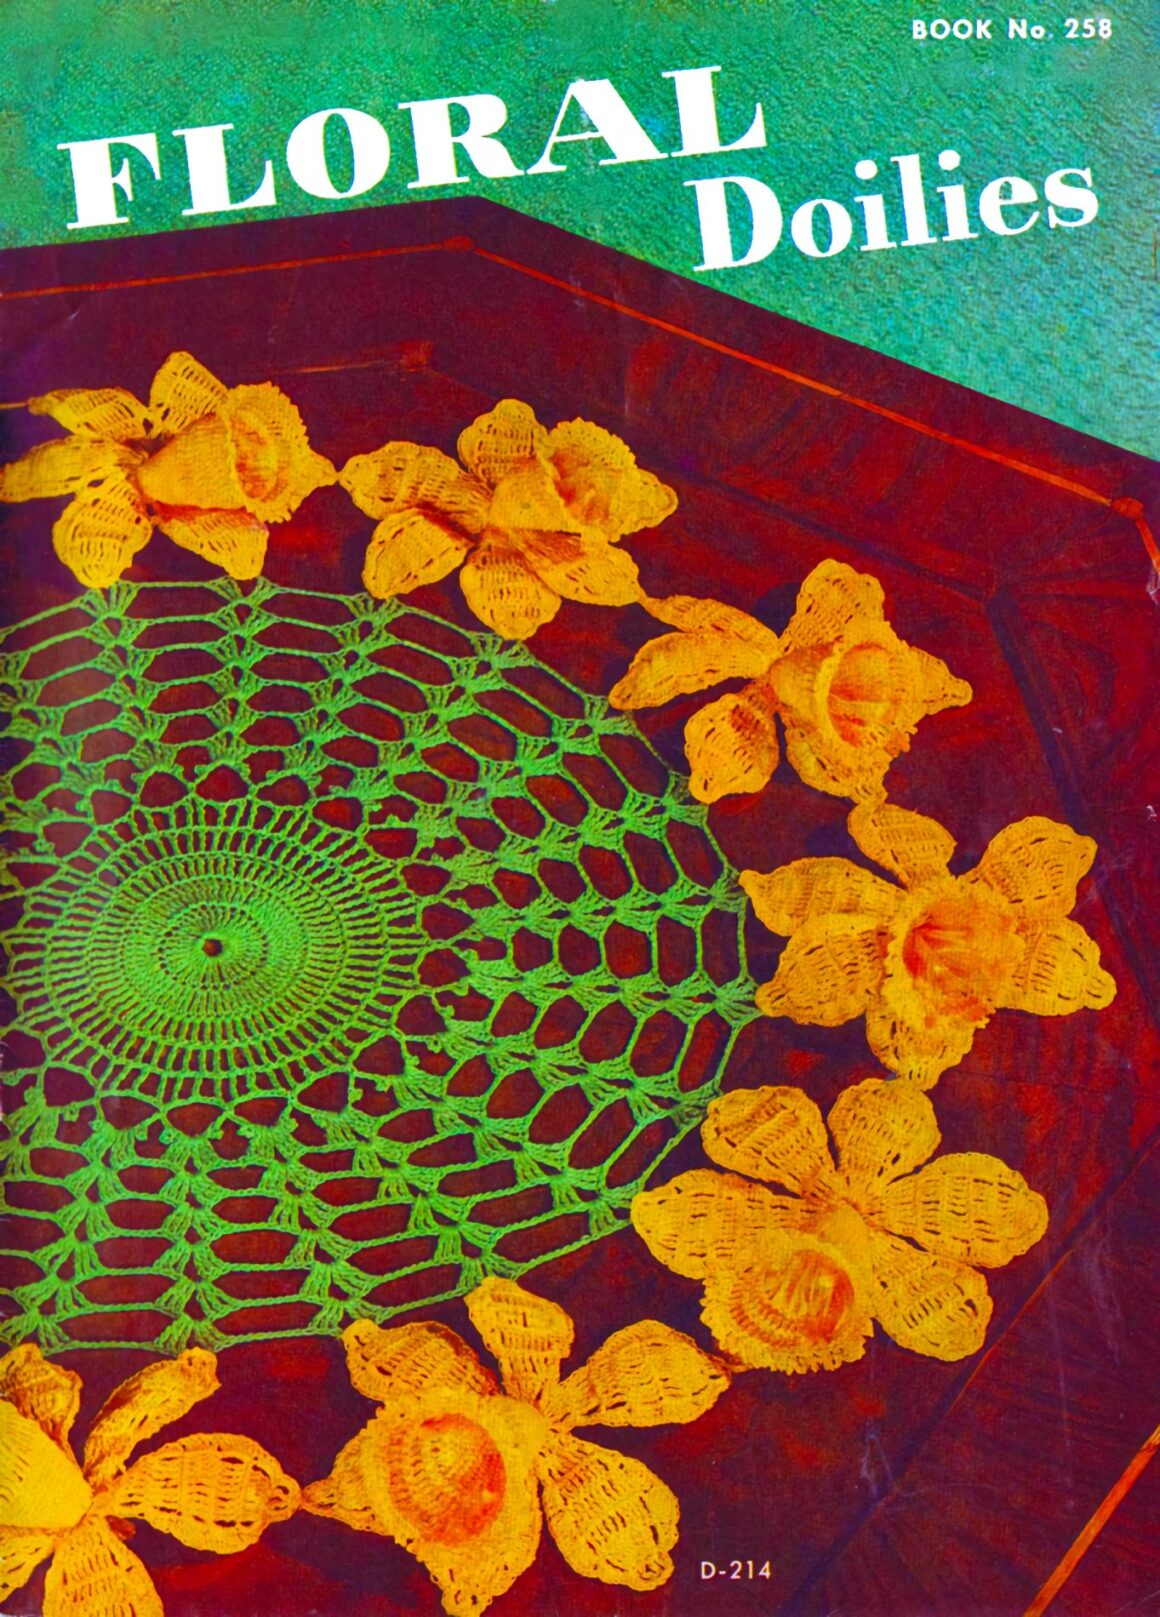 Daffodil Floral Doily Patterns